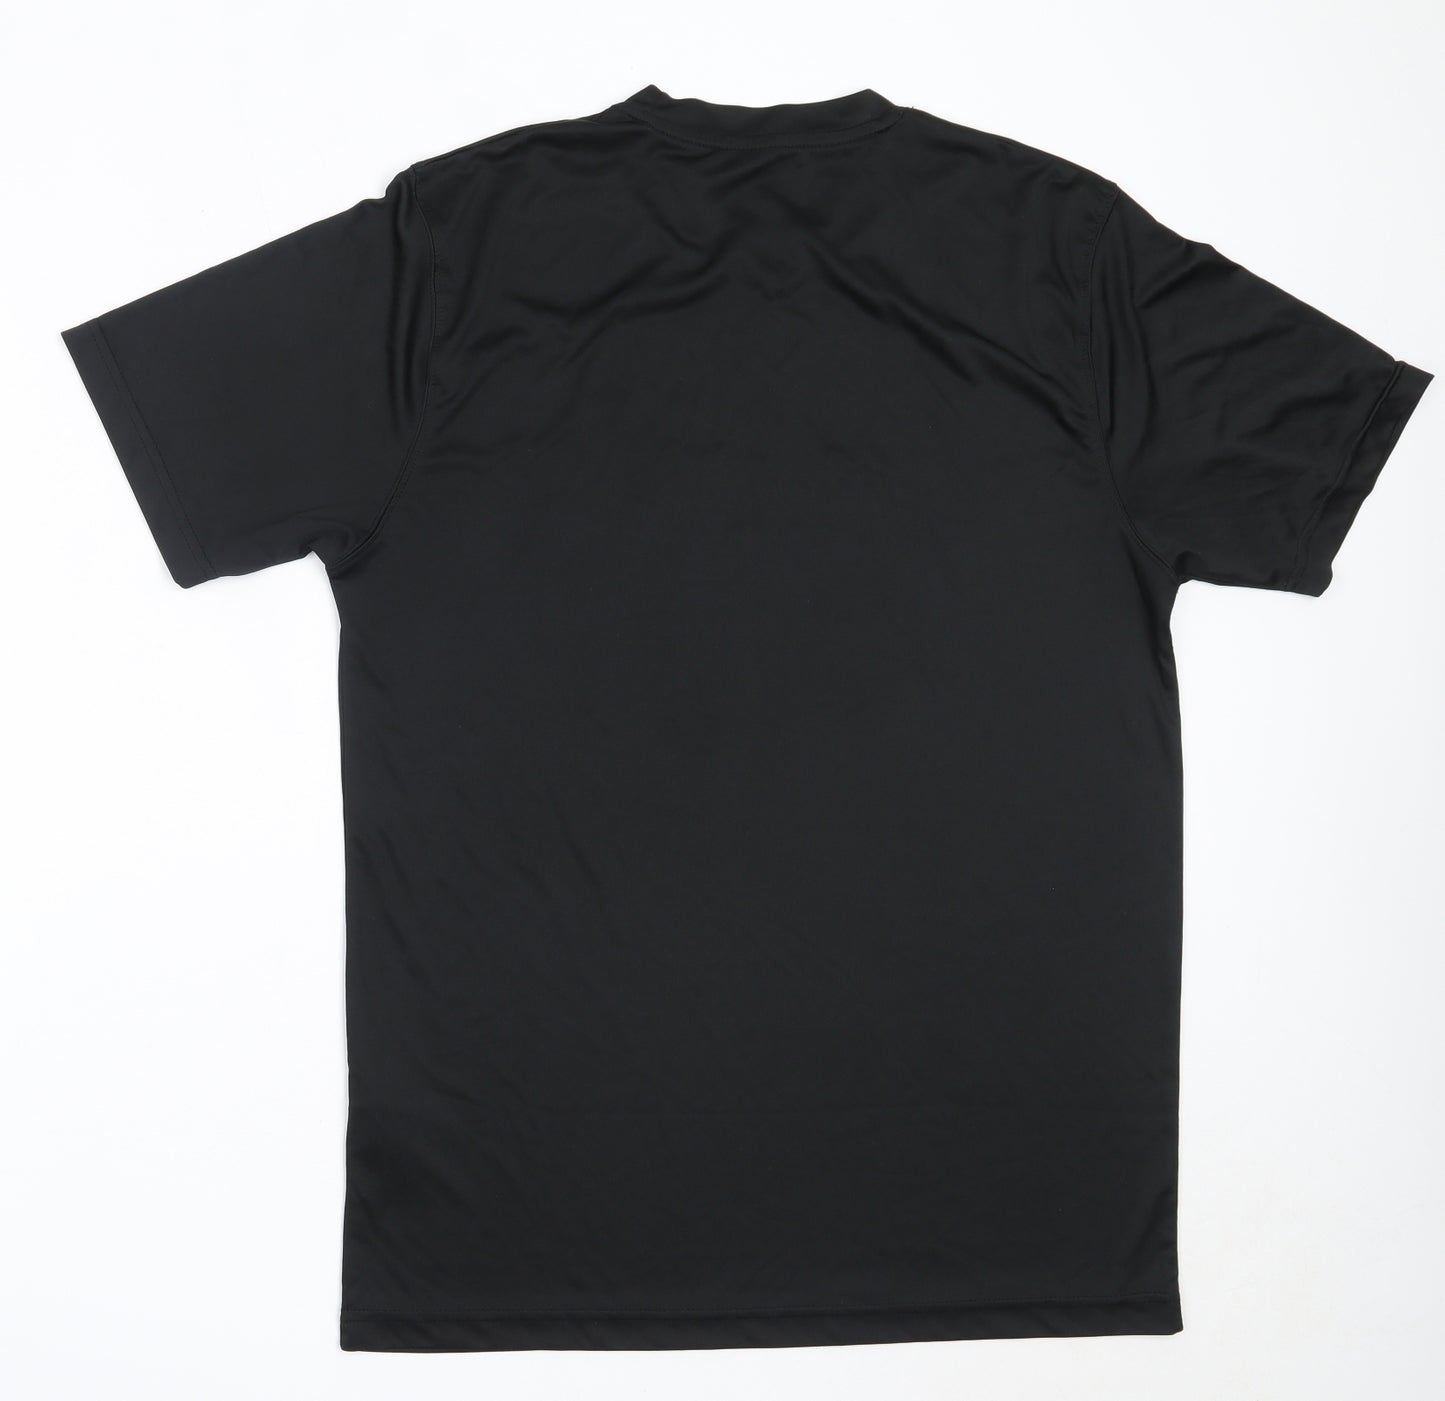 All We Do is Mens Black  Polyester  T-Shirt Size L Round Neck